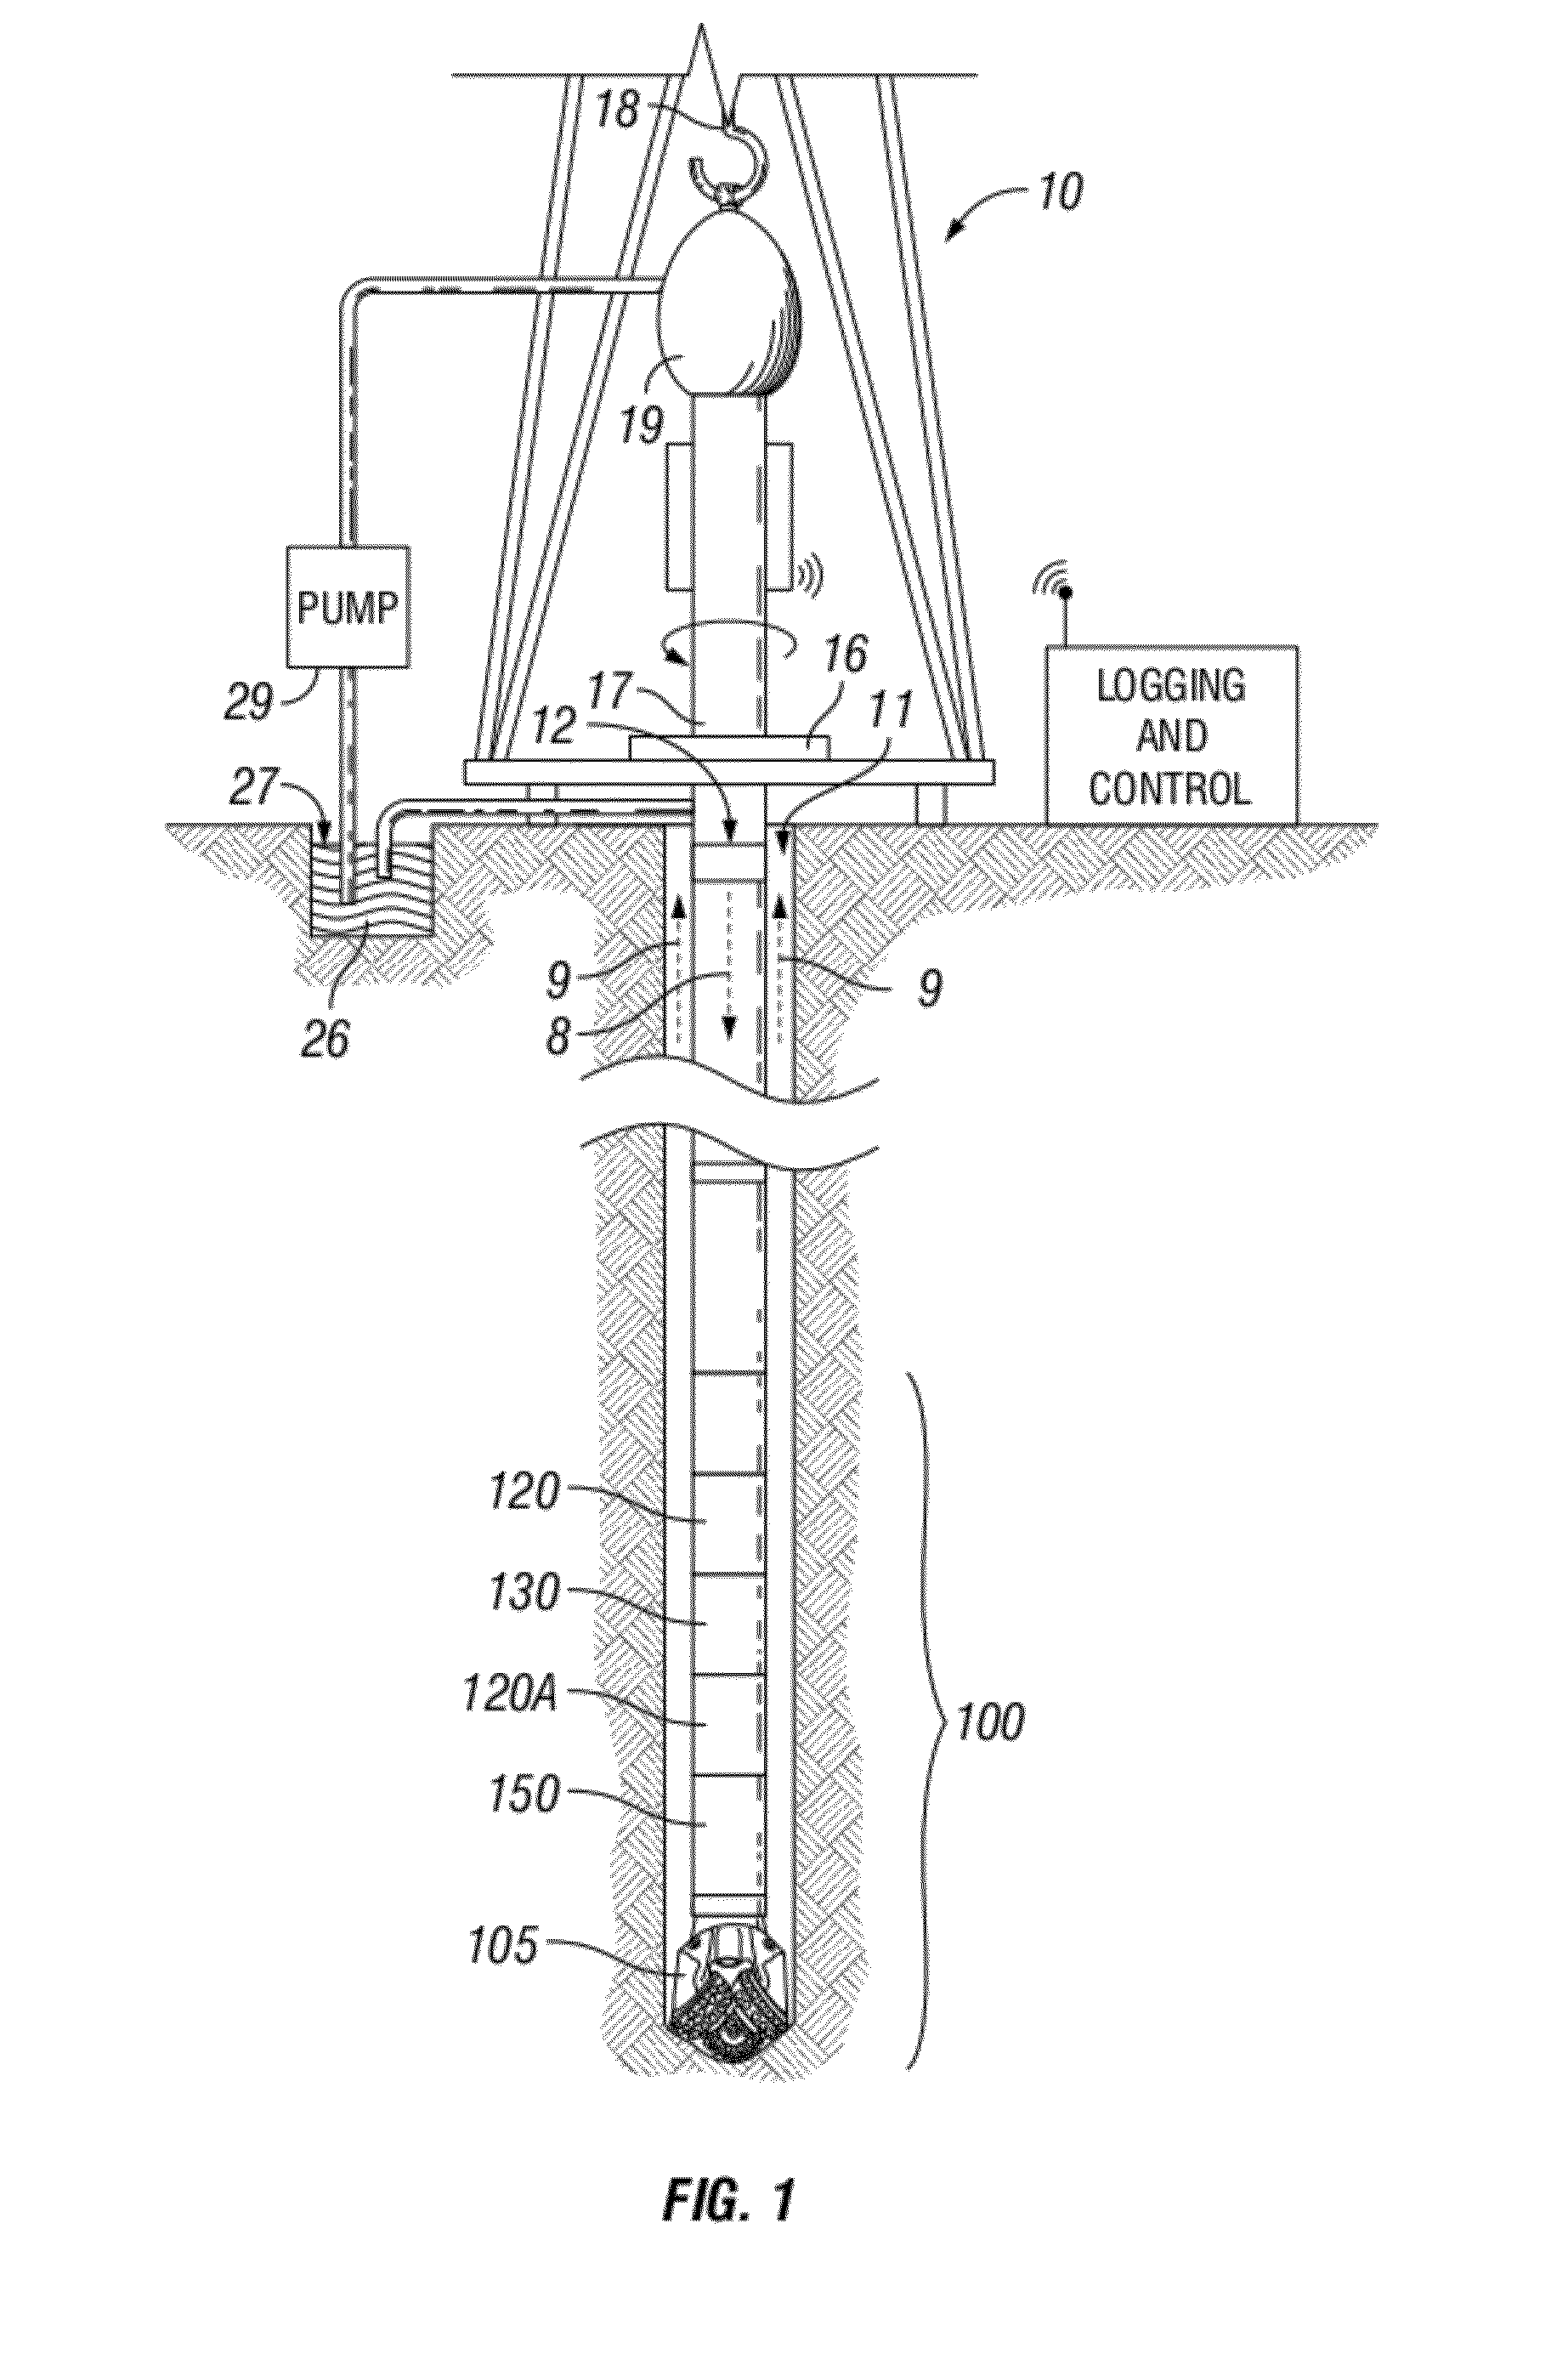 Methods and systems for measuring nmr characteristics in production logging